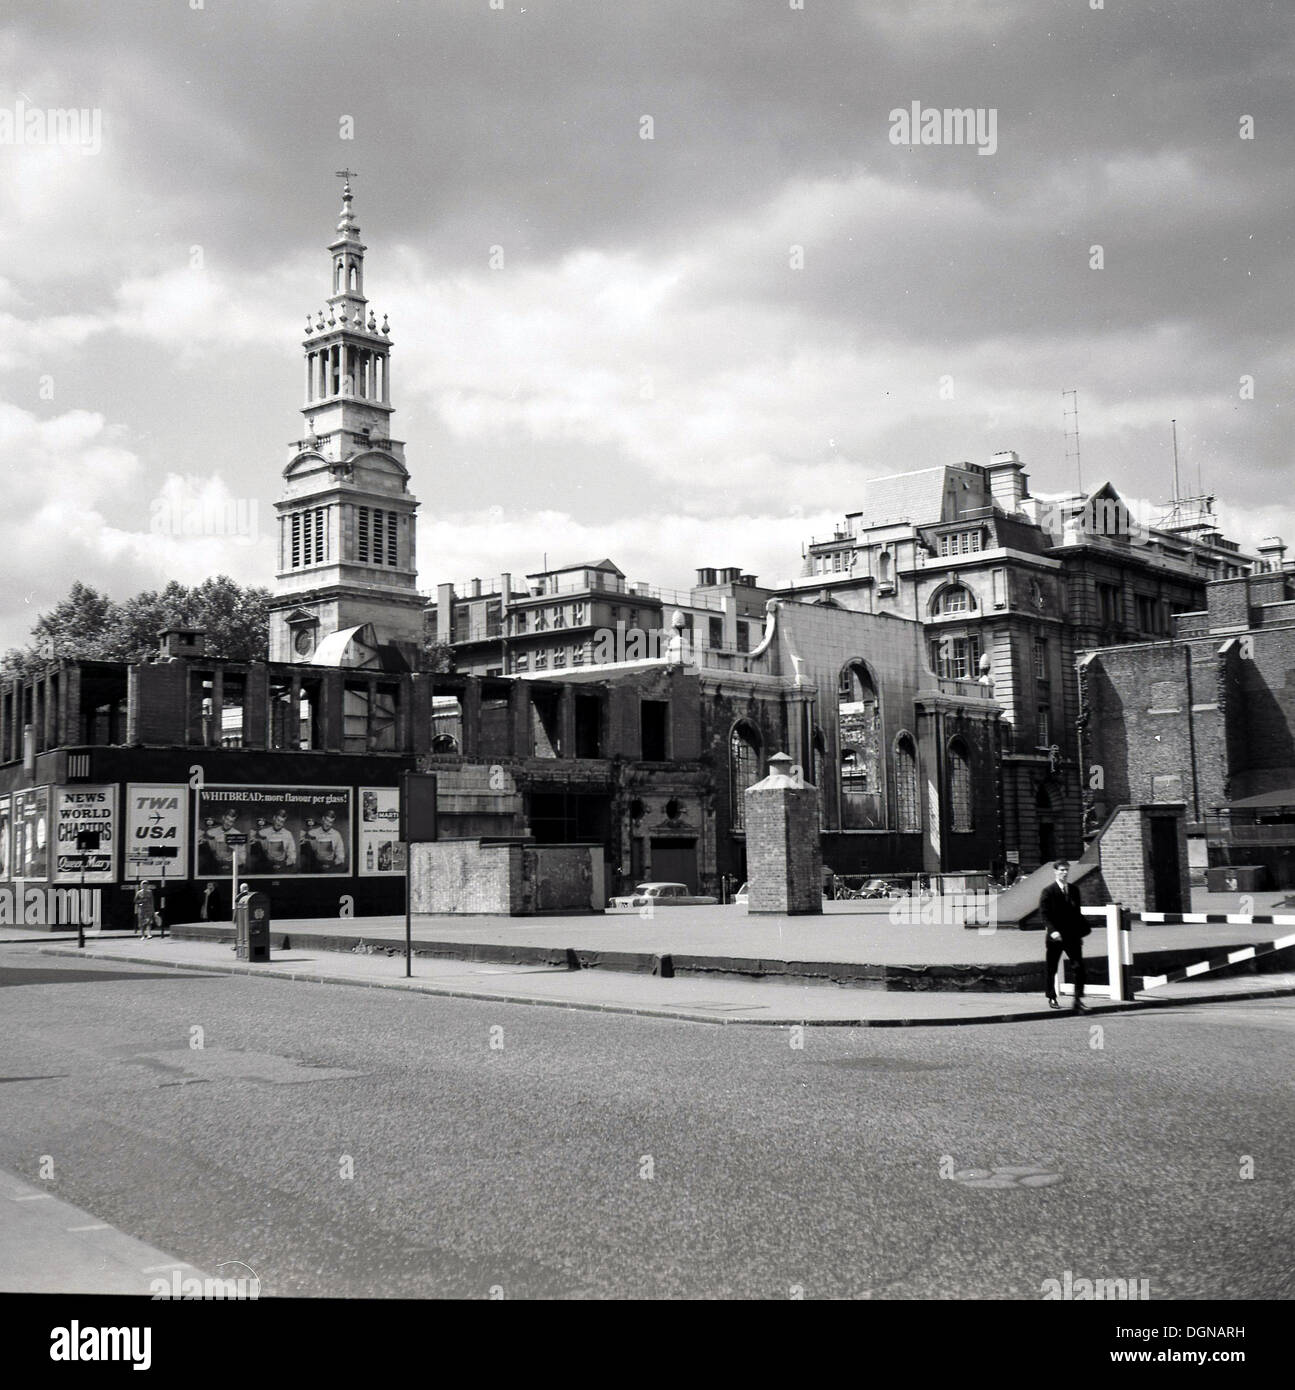 1950s, historical, post WW2 bomb damaged buildings, Central London, England, UK, with billboards. Advertisements for Brtiish Sunday newspaper, the News of the World and American airline company, TWA can be seen displayed. Stock Photo